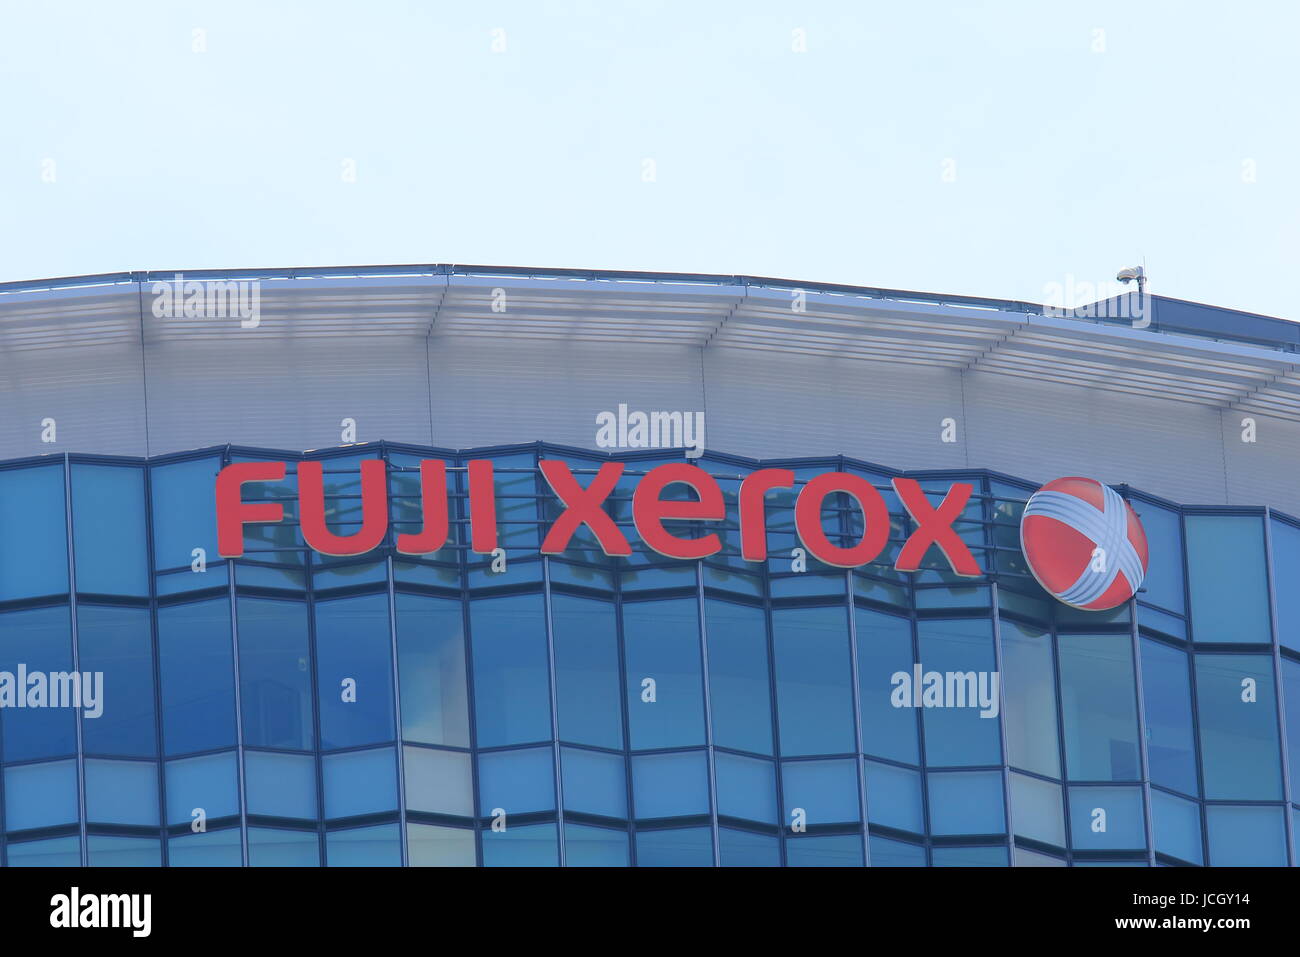 Fuji Xerox. Fuji Xerox produce xerographic and document related products founded in 1962. Stock Photo